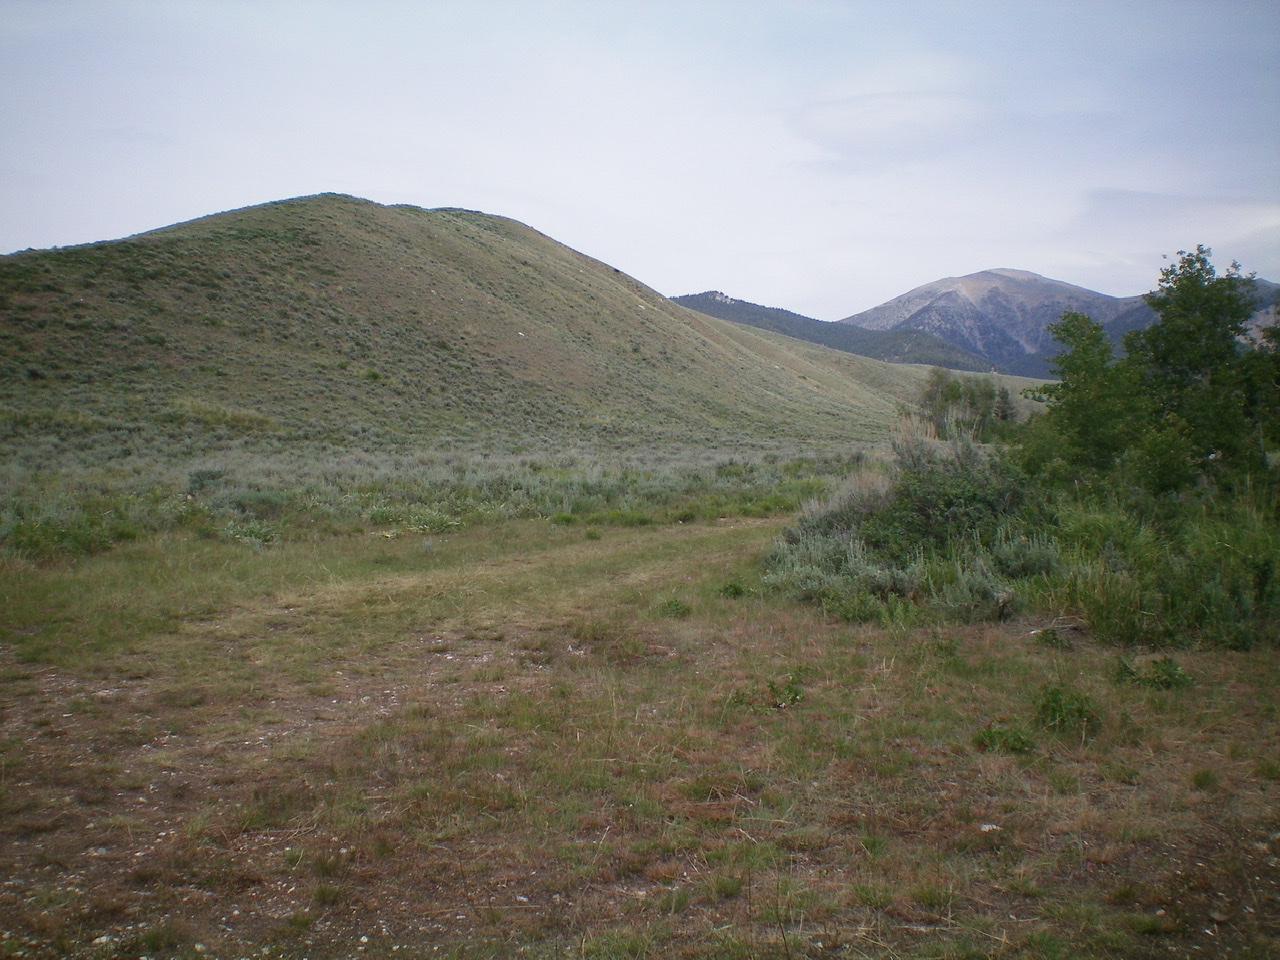 The long Southeast Ridge of Sheep Mountain, as viewed from Sawmill Canyon Road. The summit is bald and is right of center, with the forested Southwest Ridge leading up to it. Livingston Douglas Photo 